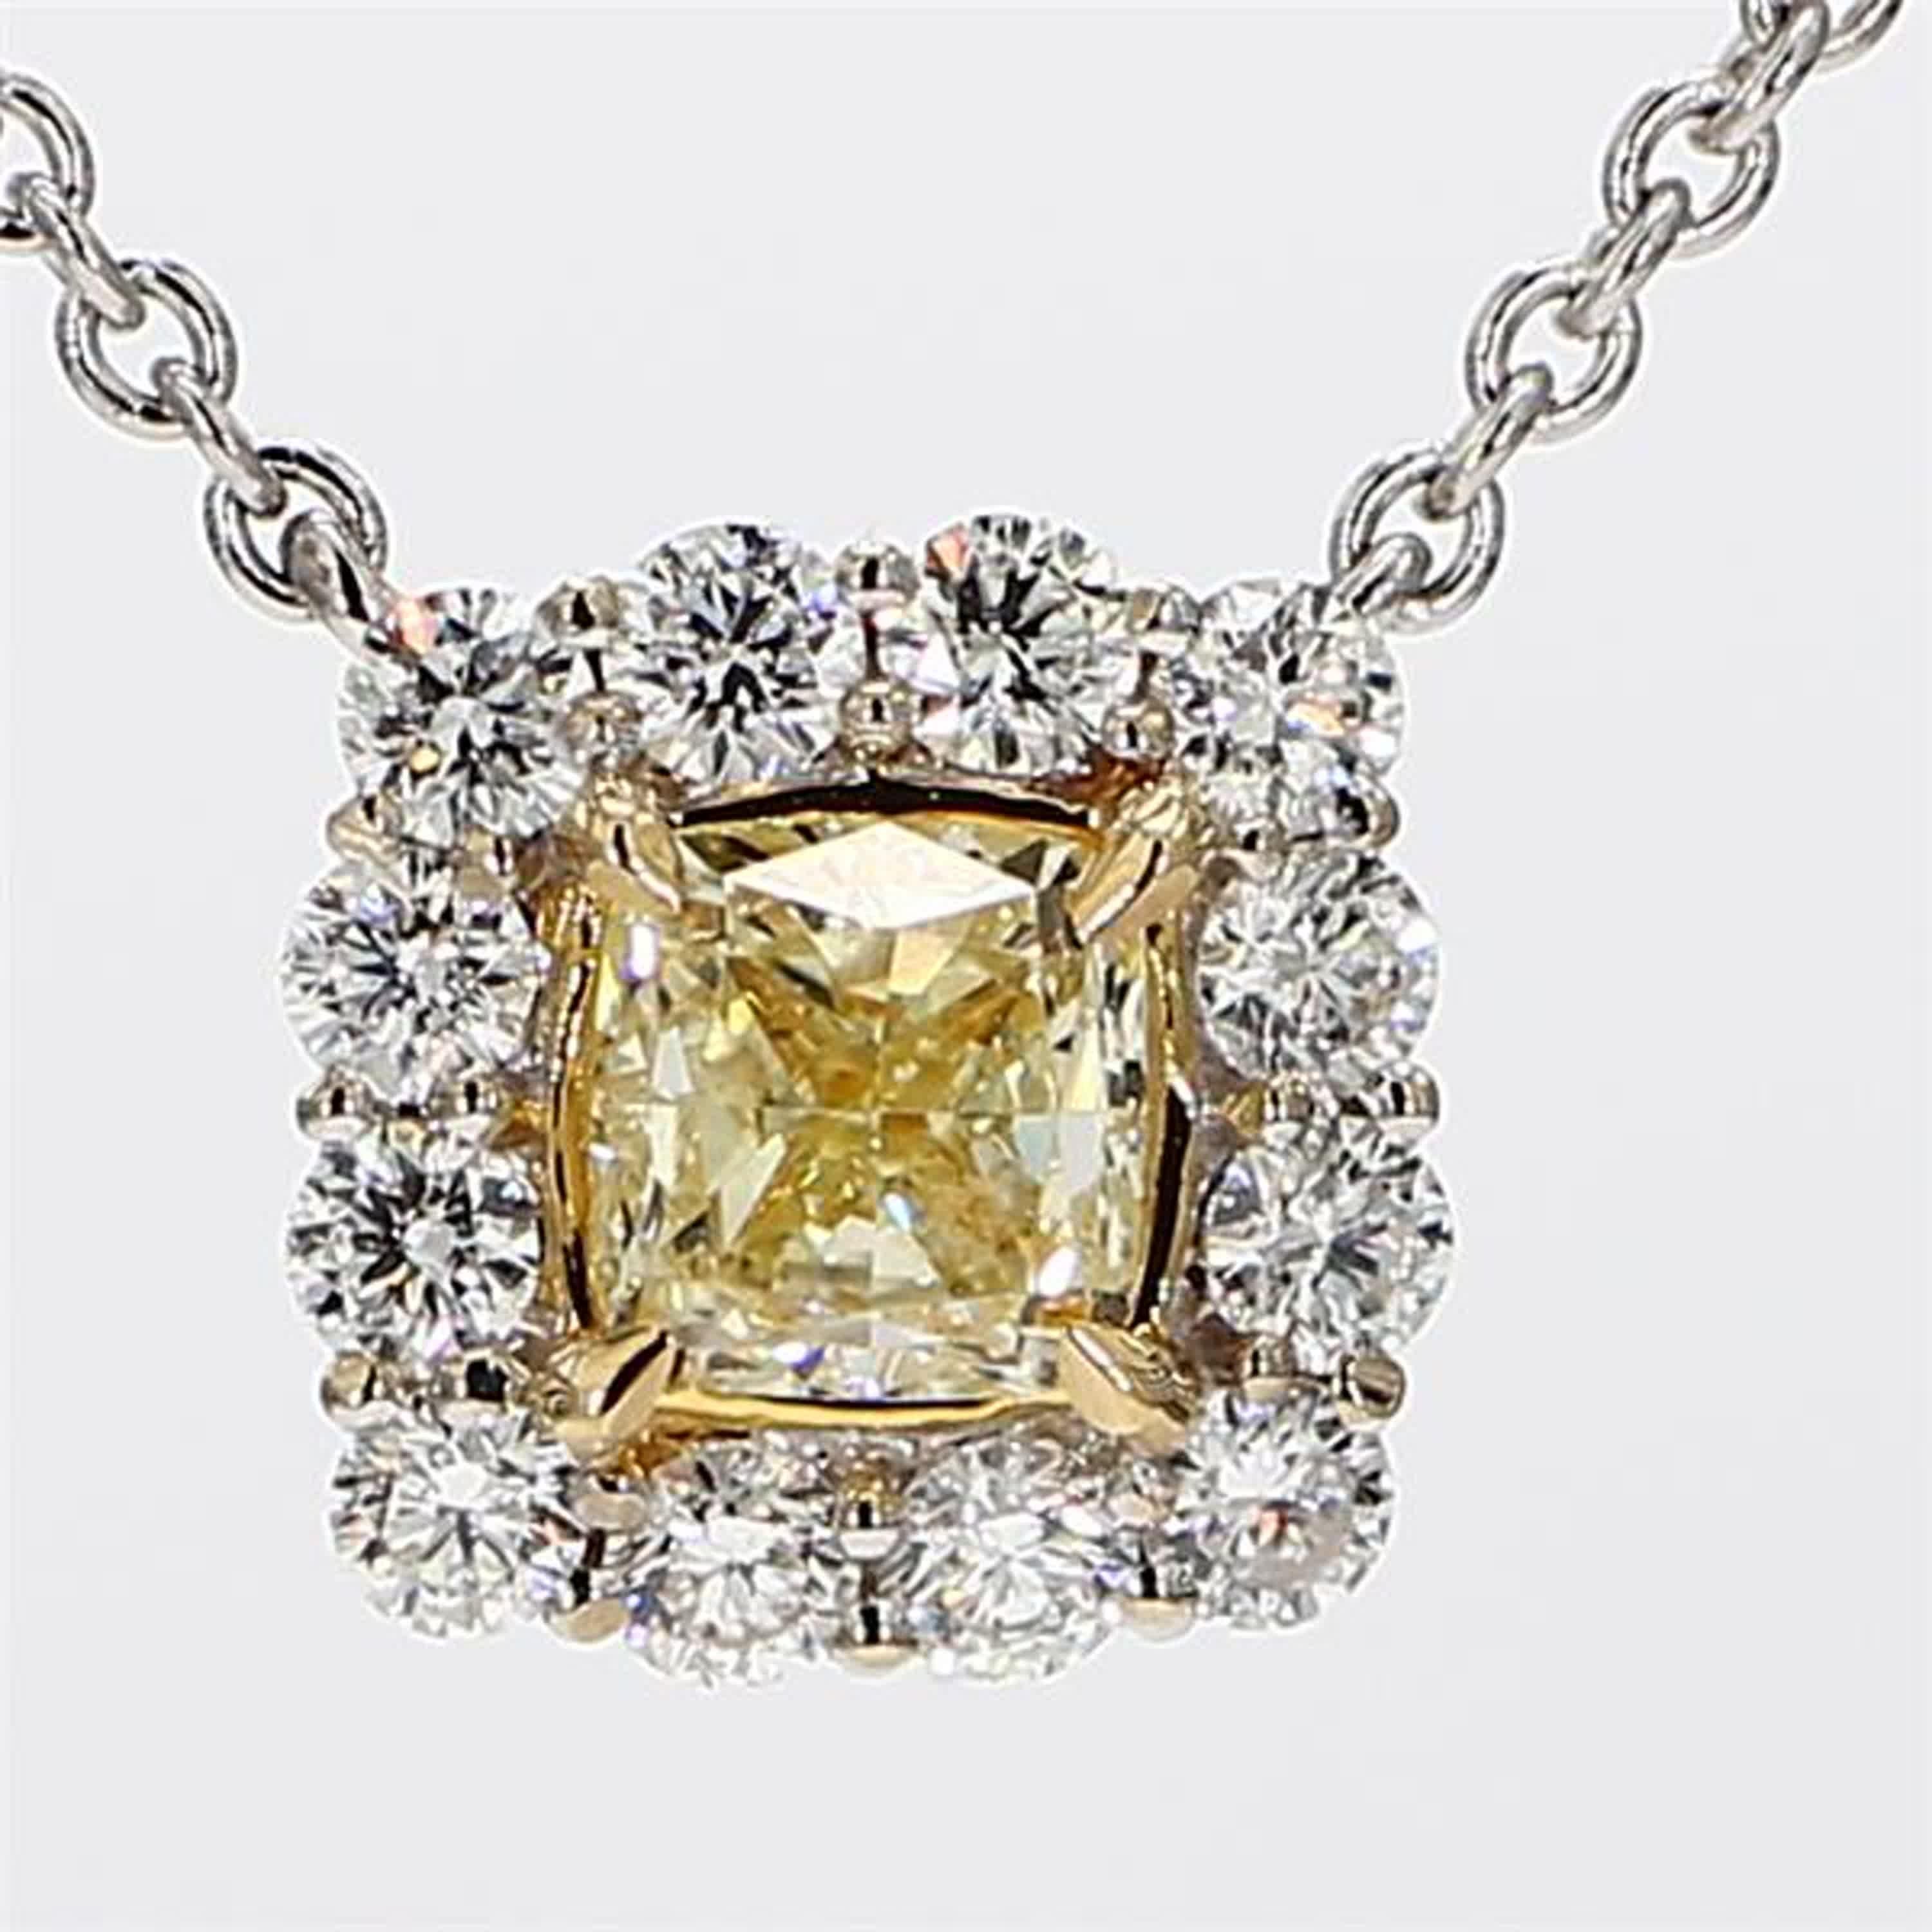 RareGemWorld's intriguing diamond pendant. Mounted in a beautiful 18K Yellow and White Gold setting with a natural cushion cut yellow diamond. The yellow diamond is surrounded by small round natural white diamond melee. This pendant is guaranteed to